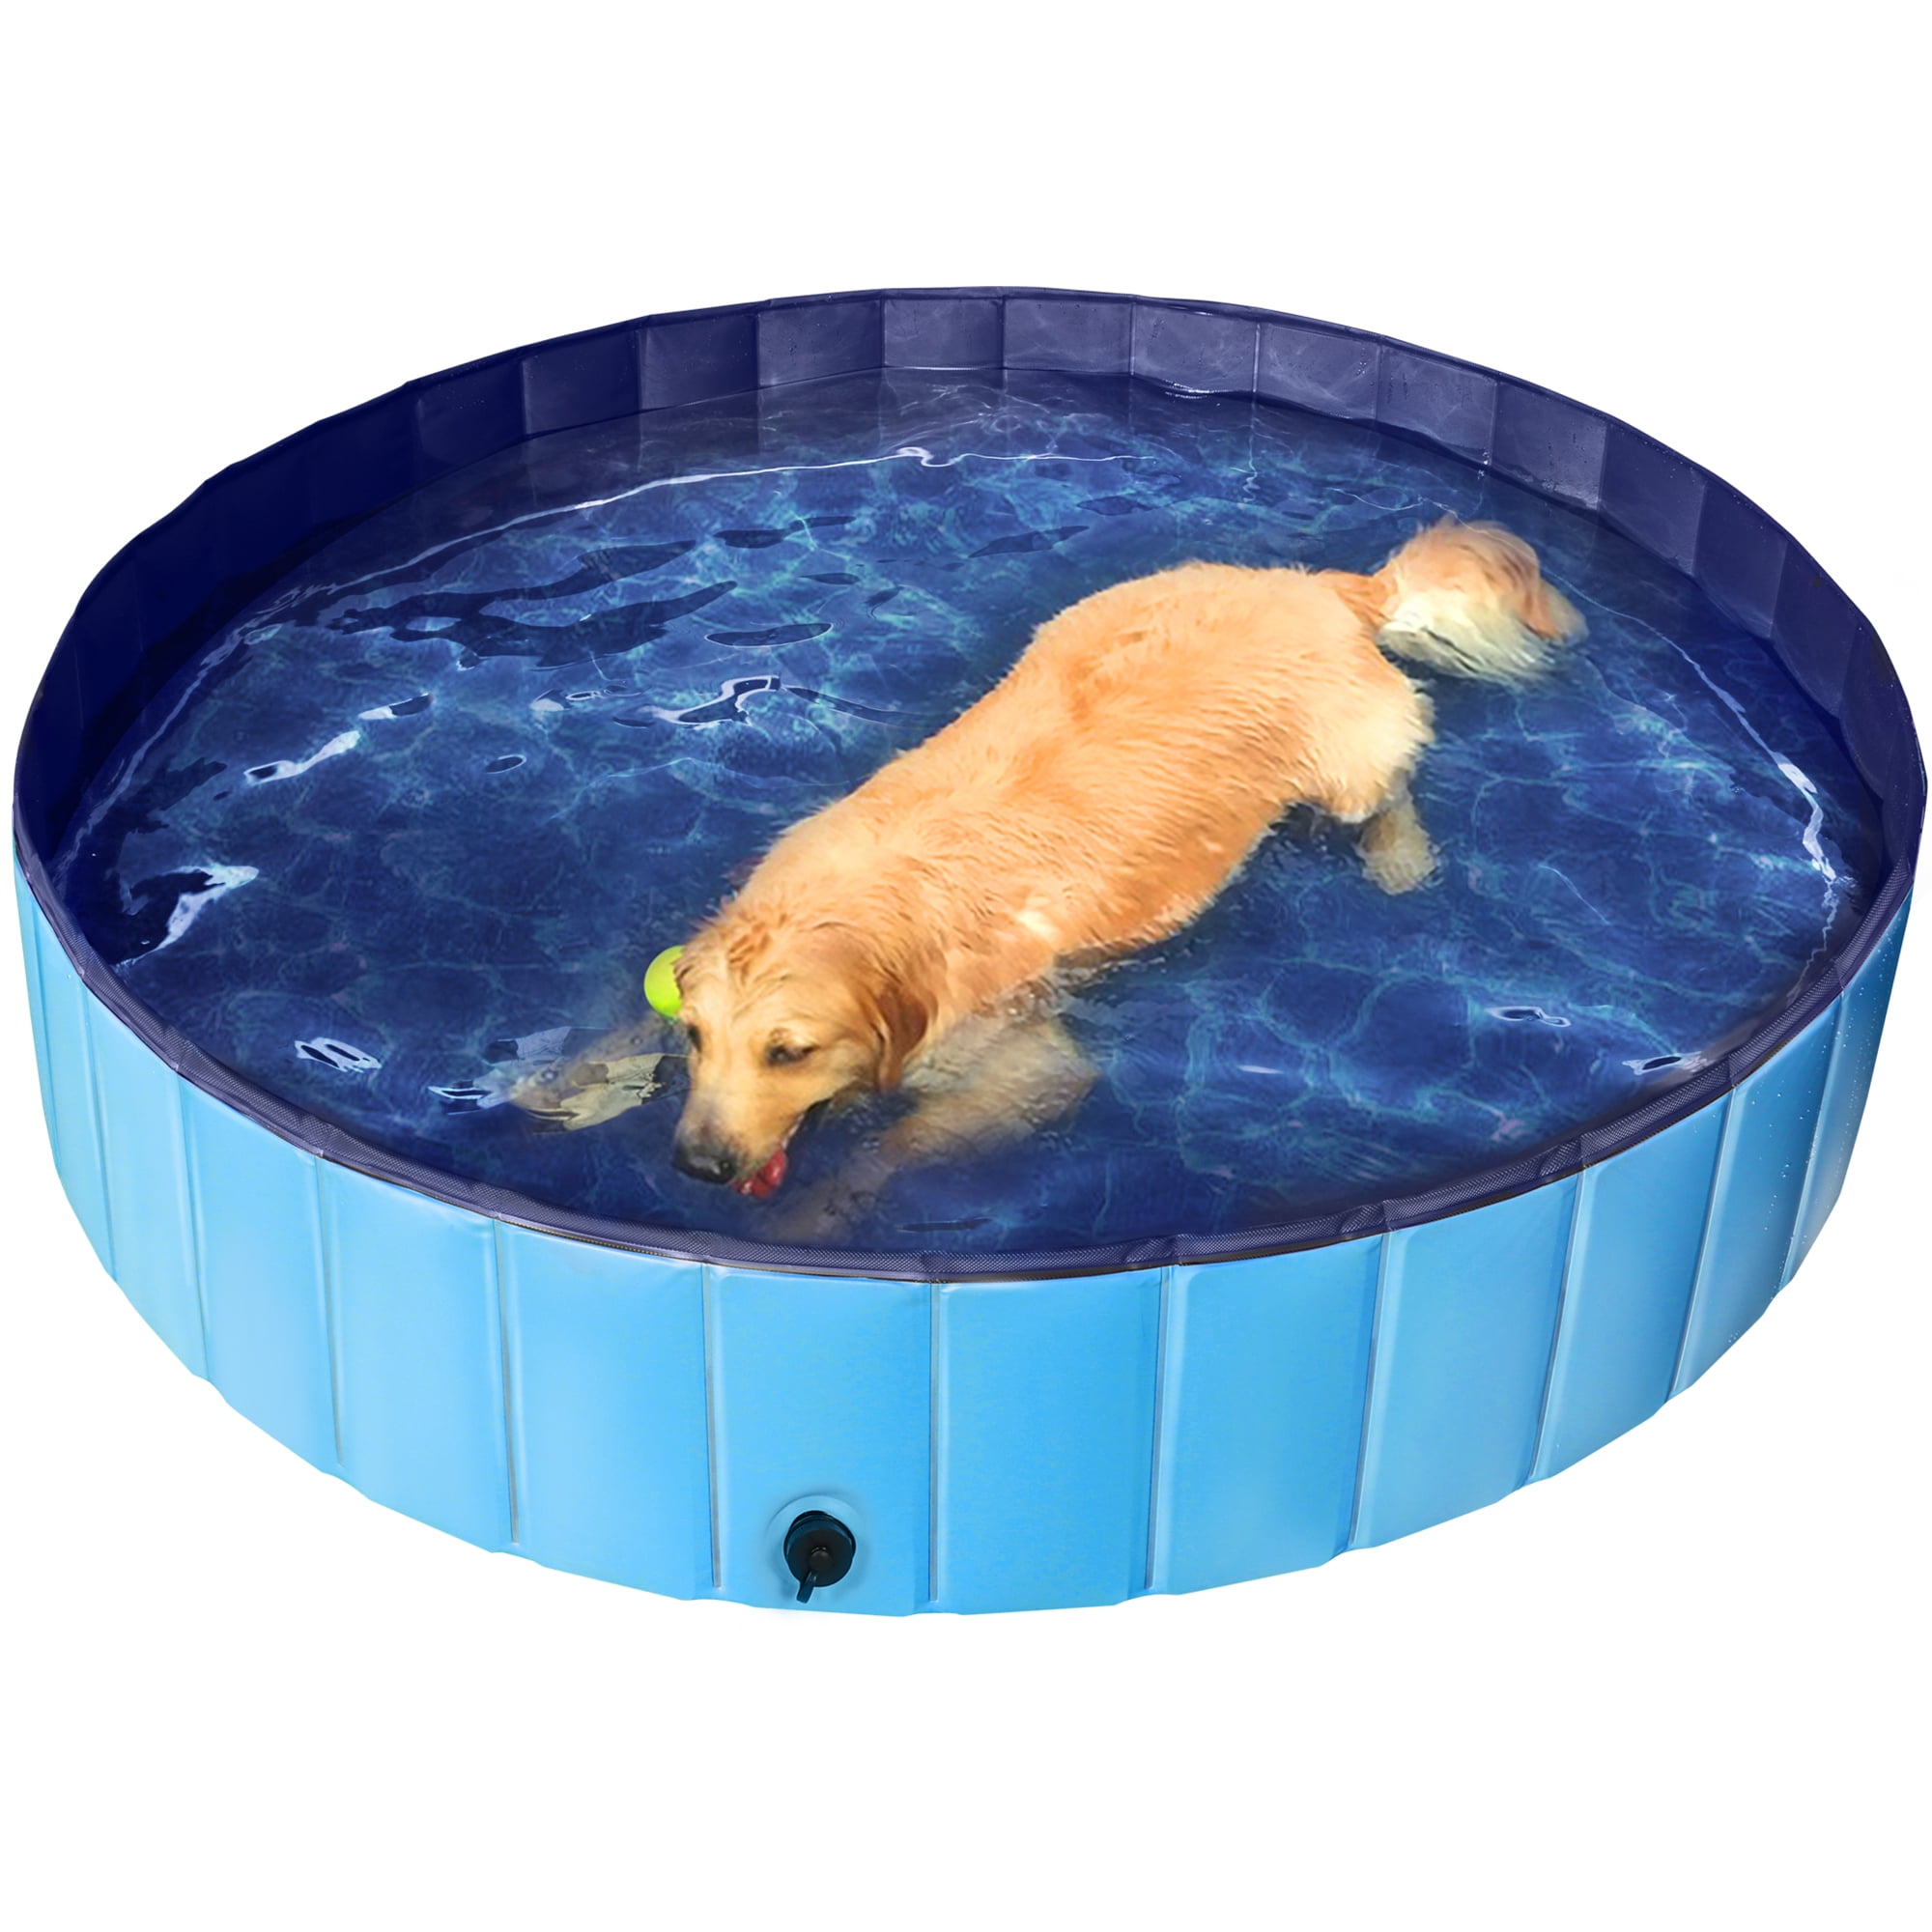 Easyfashion Foldable Pet Swimming Pool Wash Tub for Cats and Dogs 